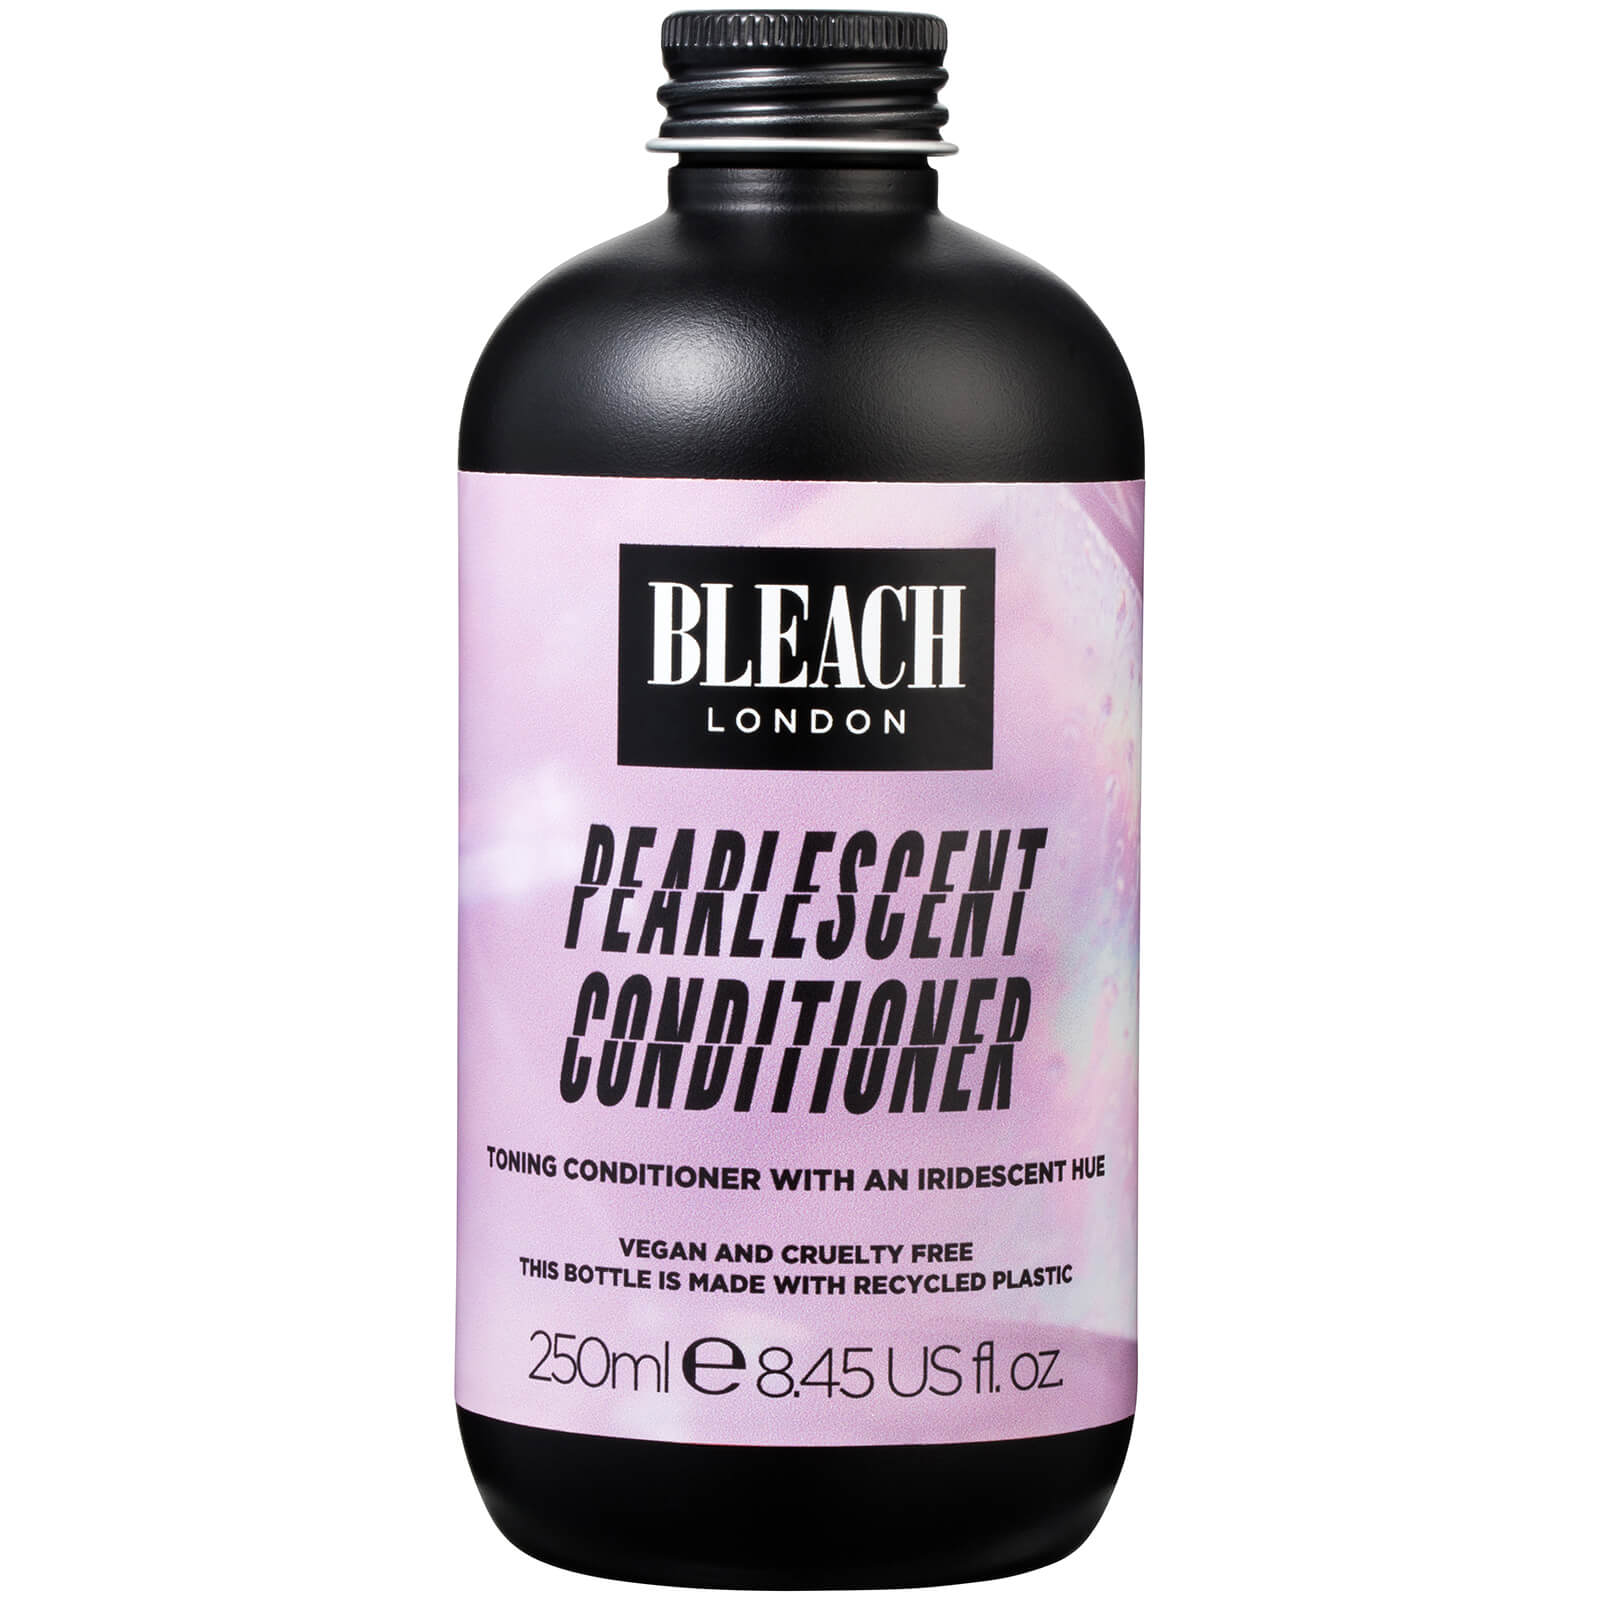 Bleach London Pearlescent Conditioner